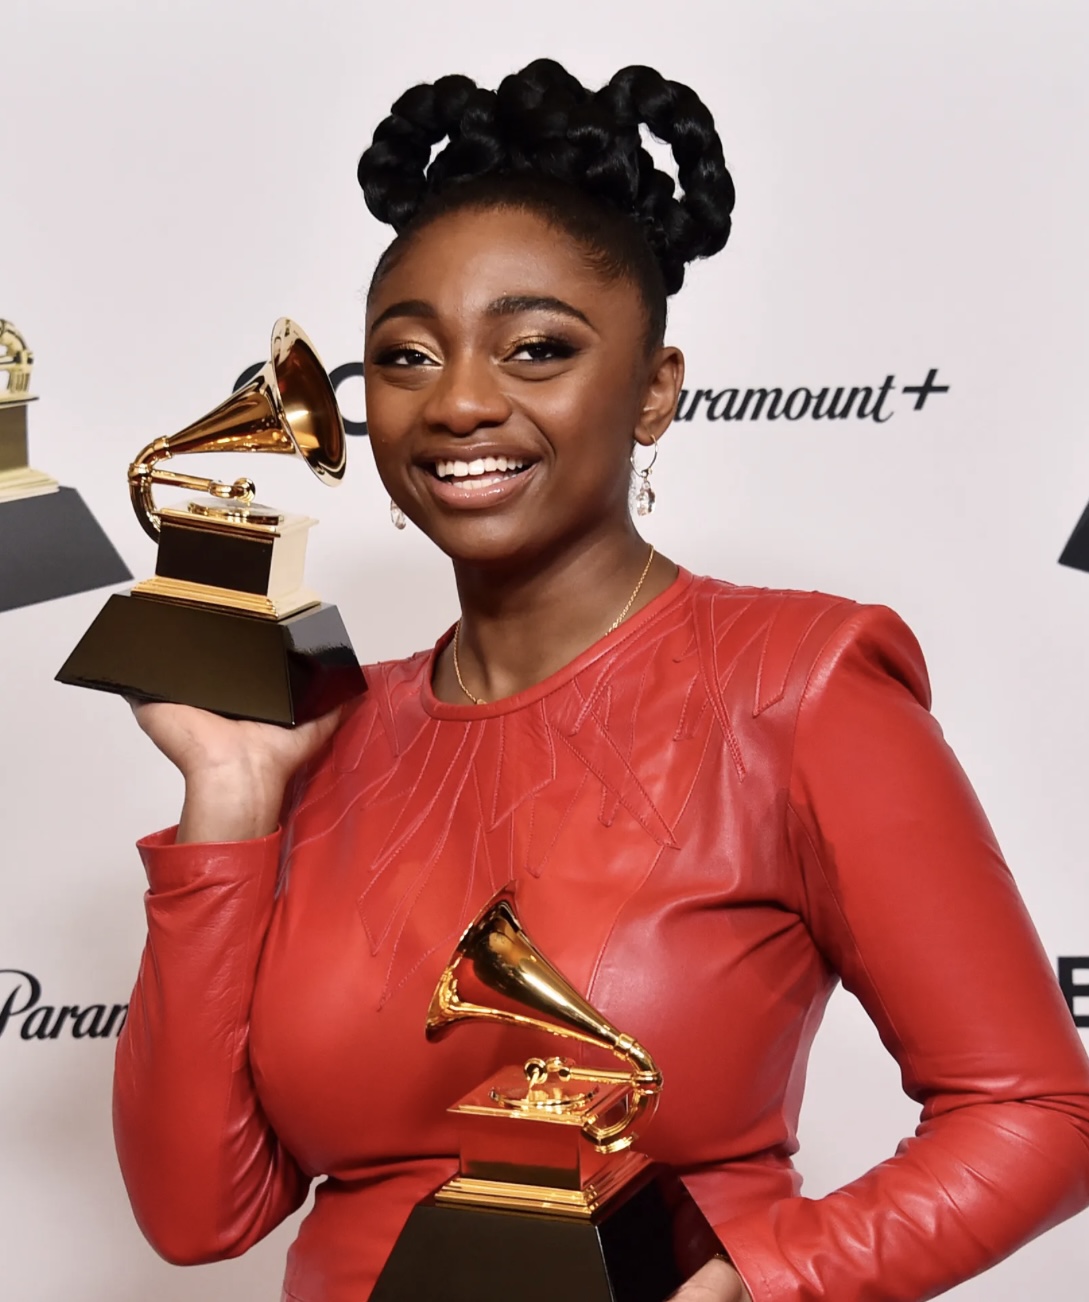 At the 2023 GRAMMY Awards Samara Joy took home two trophies including Best New Artist